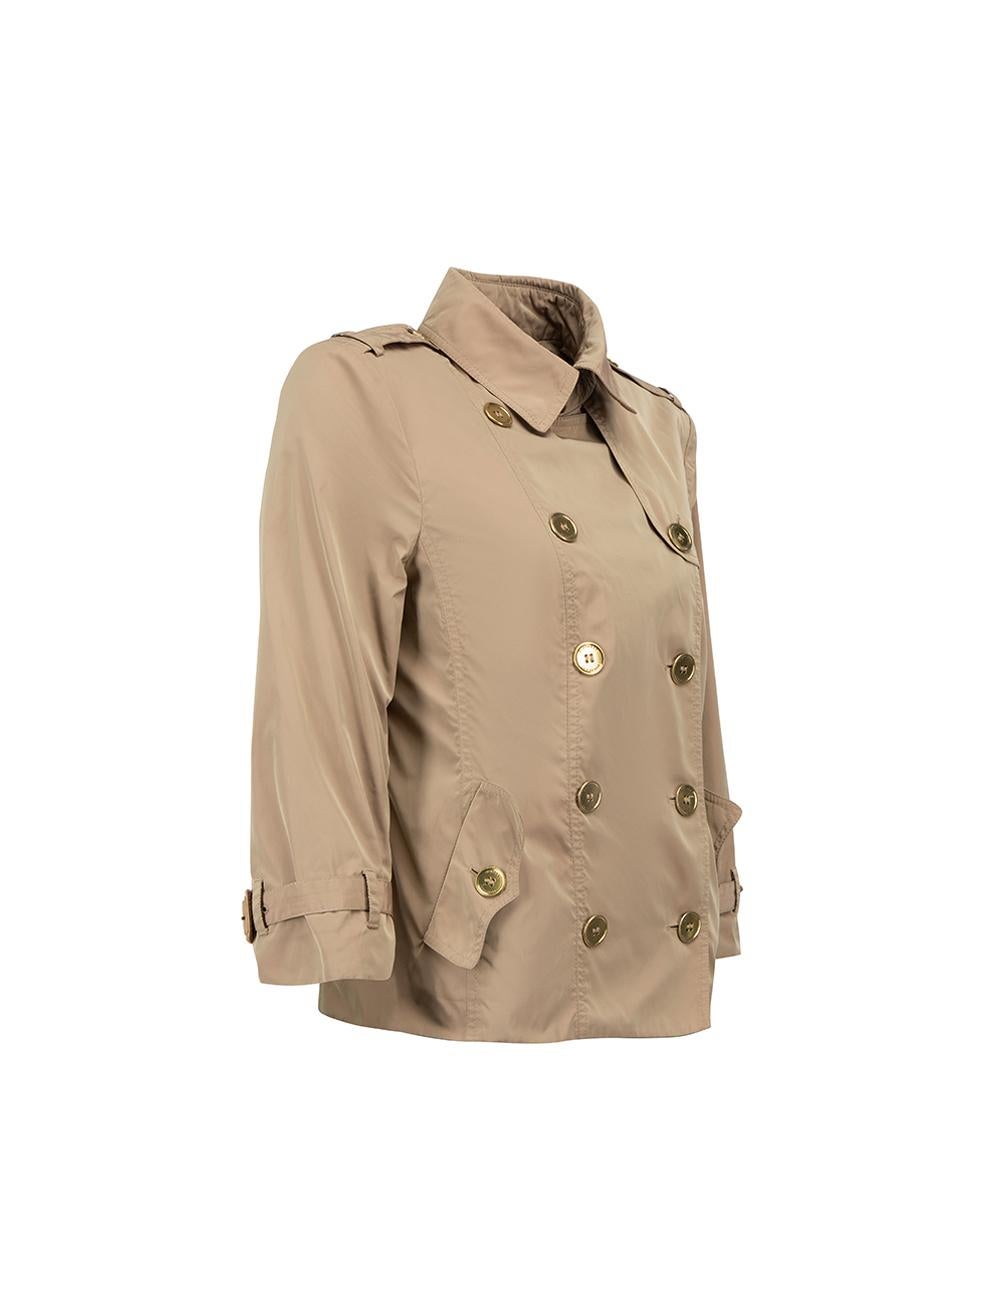 CONDITION is Very good. Minimal wear to coat is evident. Minimal wear to the front and back with discoloured marks on this used Burberry designer resale item.



Details


Beige

Polyester

Short

Gold tone hardware

Elbow length sleeves

Front side